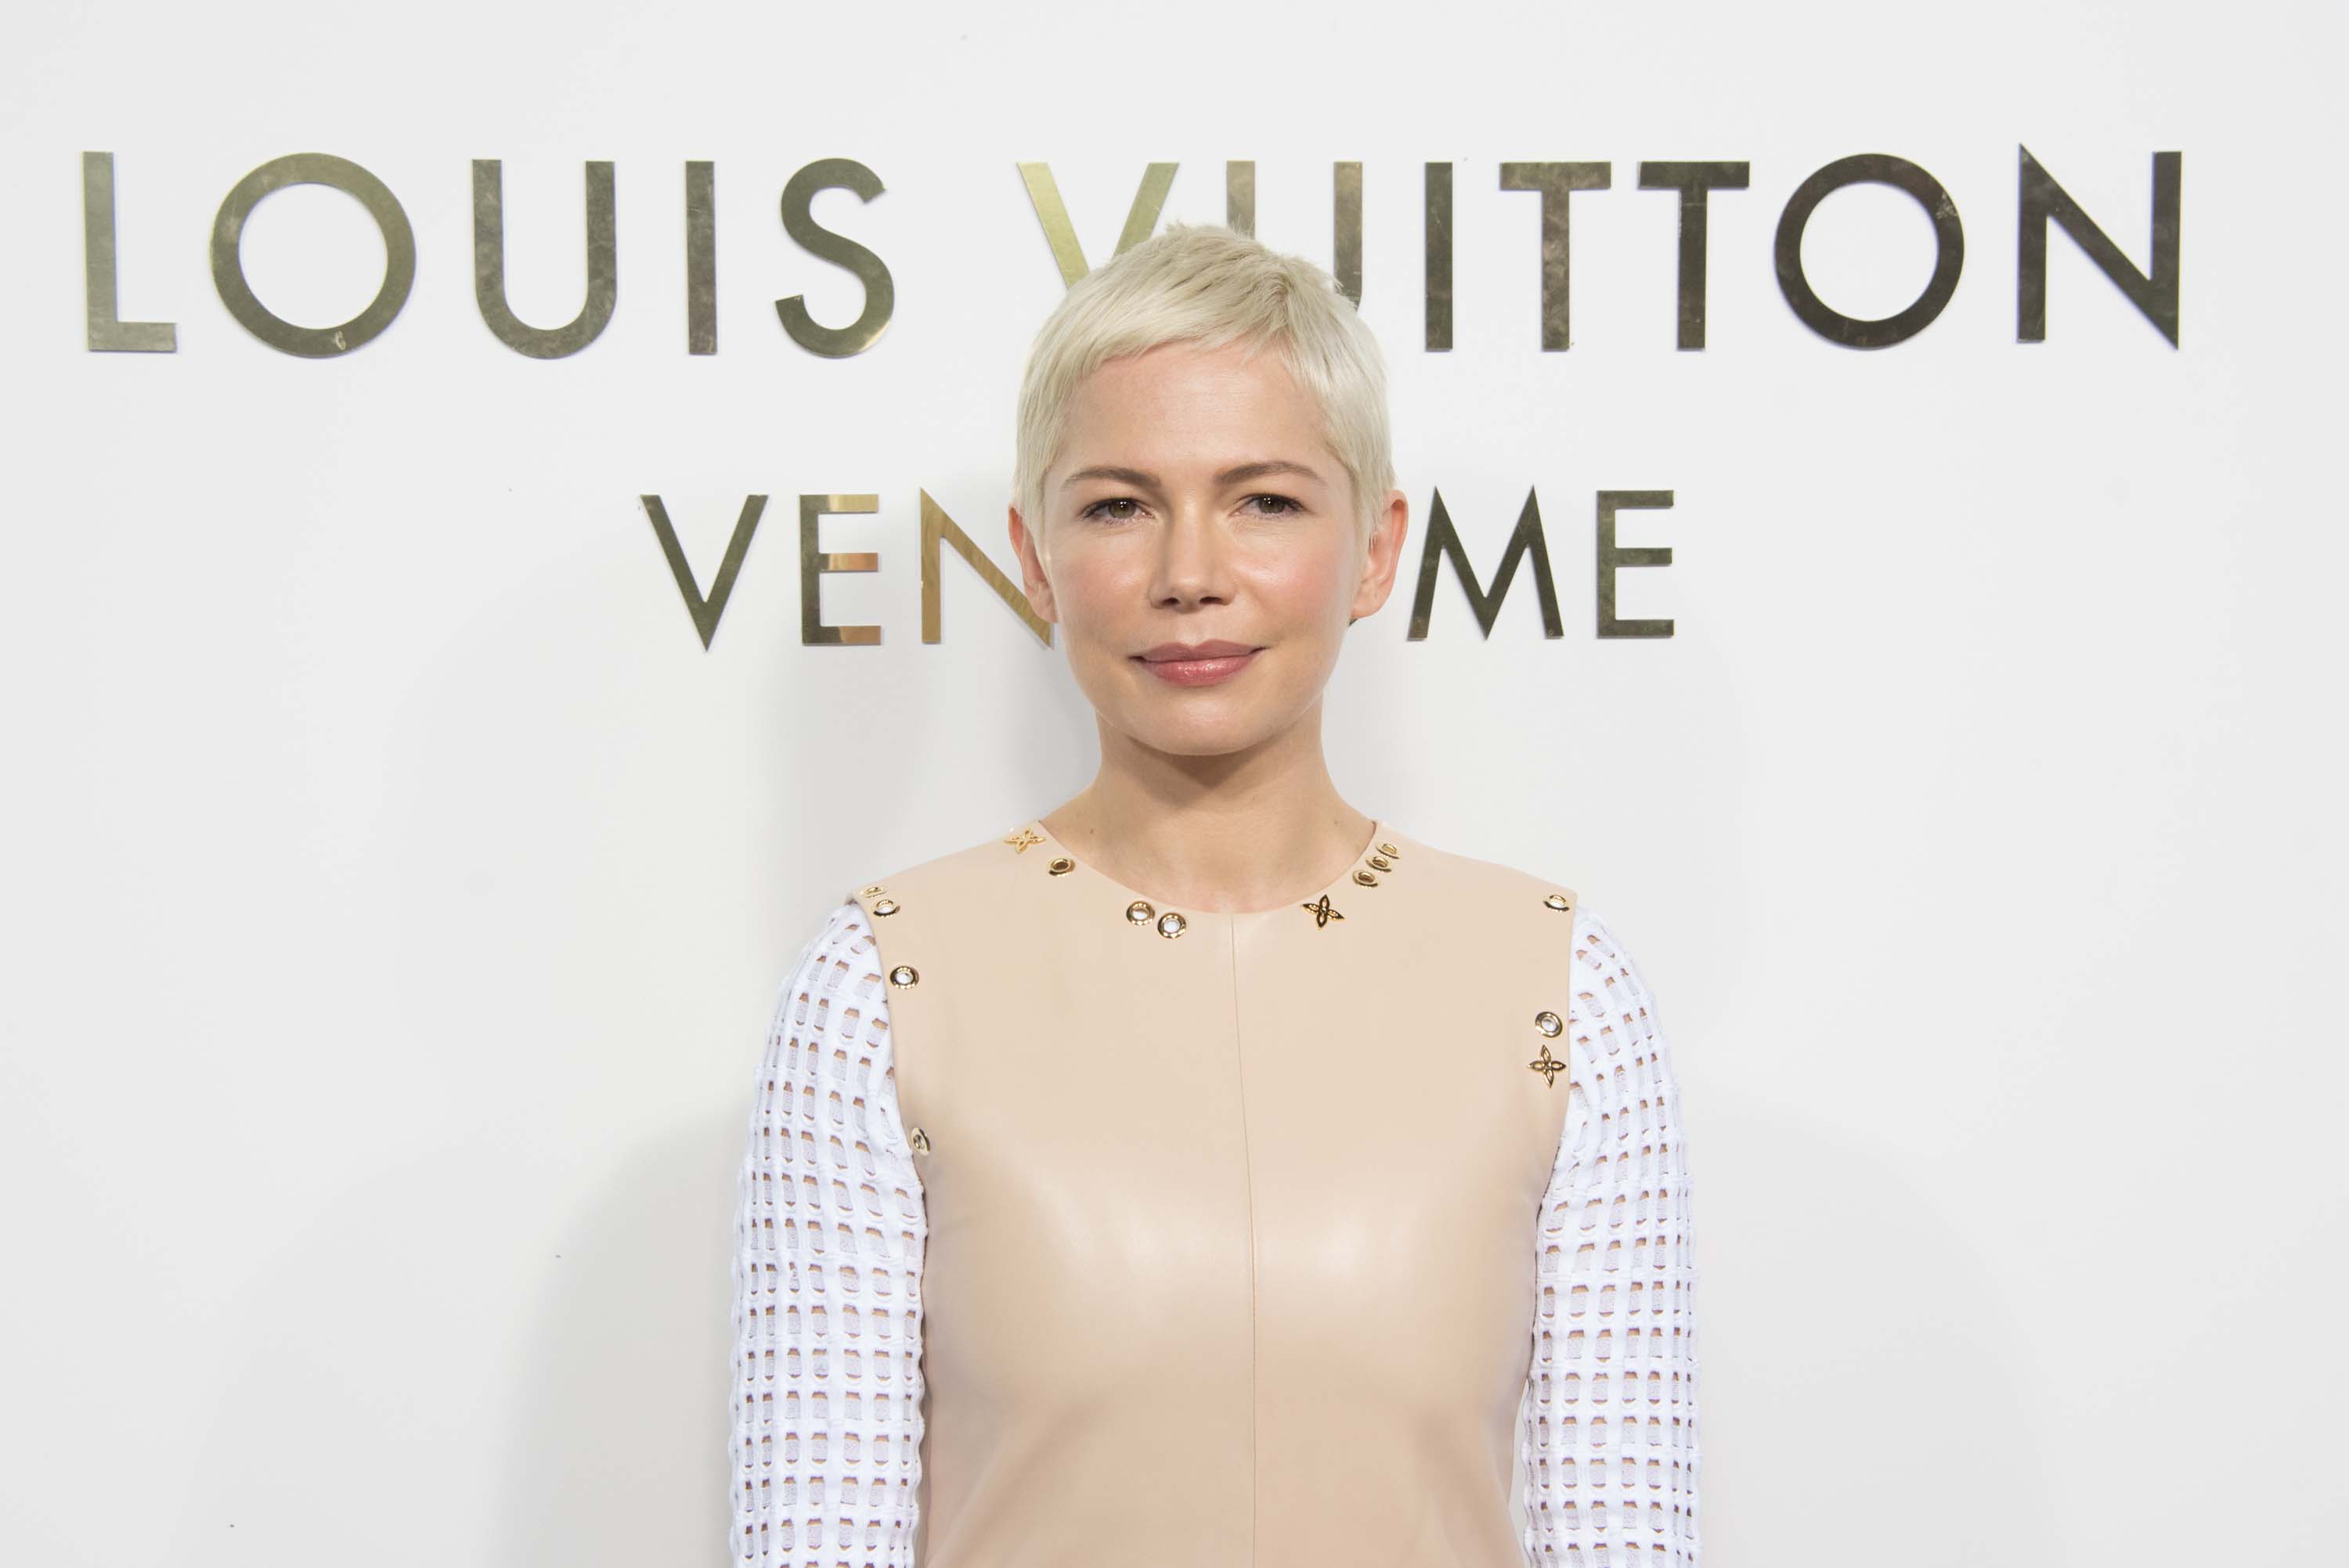 Michelle Williams attends Opening Of The Louis Vuitton Boutique